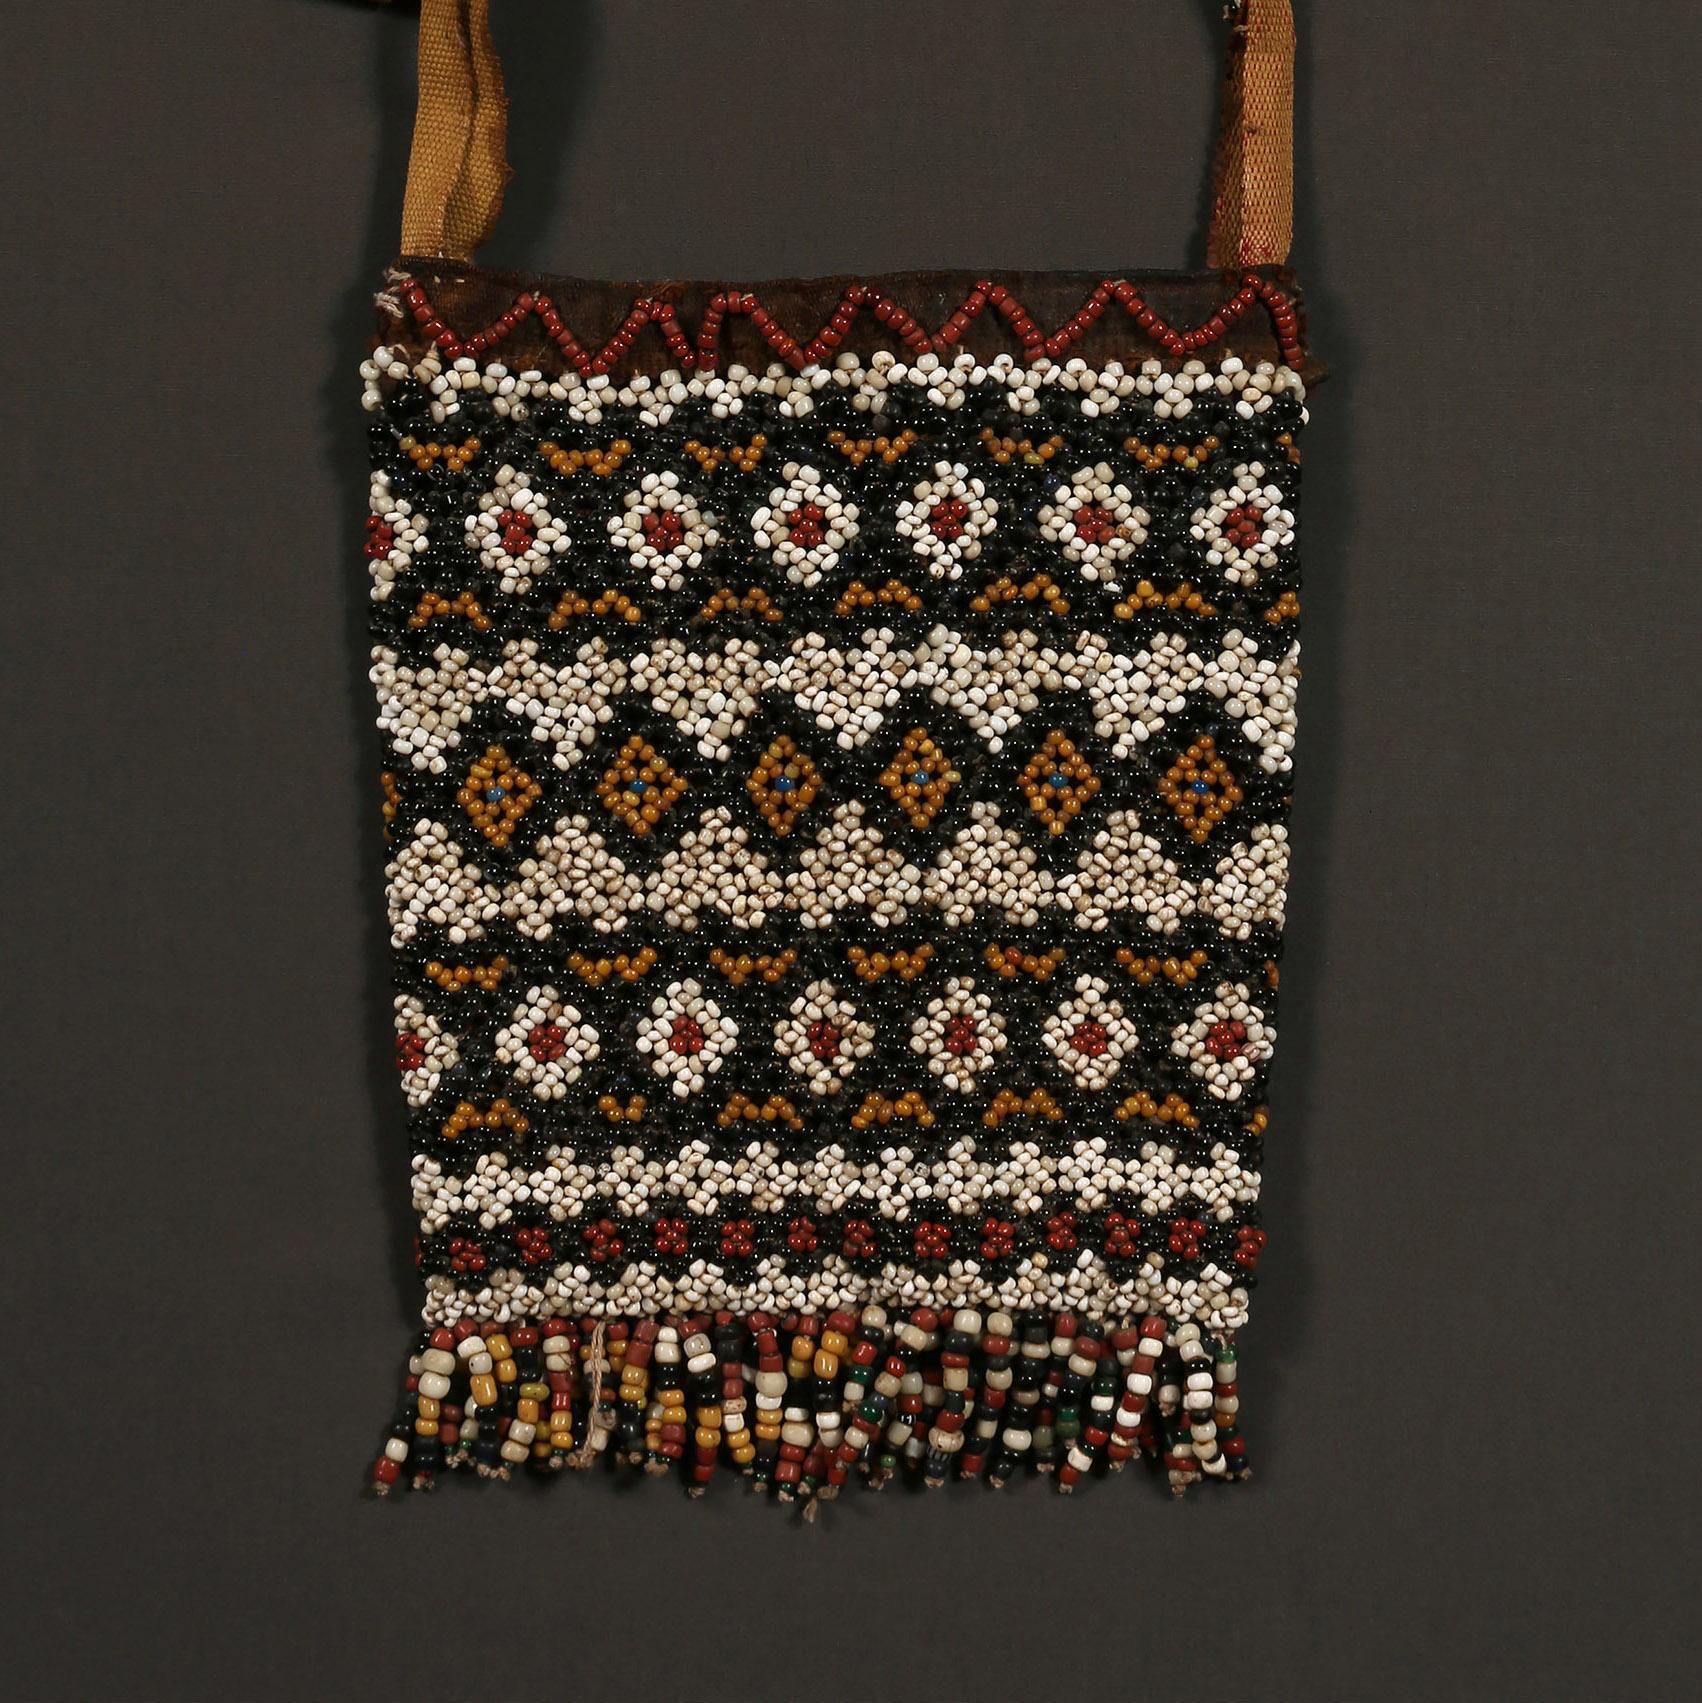 Sumatran beaded betel bag made of glass trade beads from early to mid-20th century.